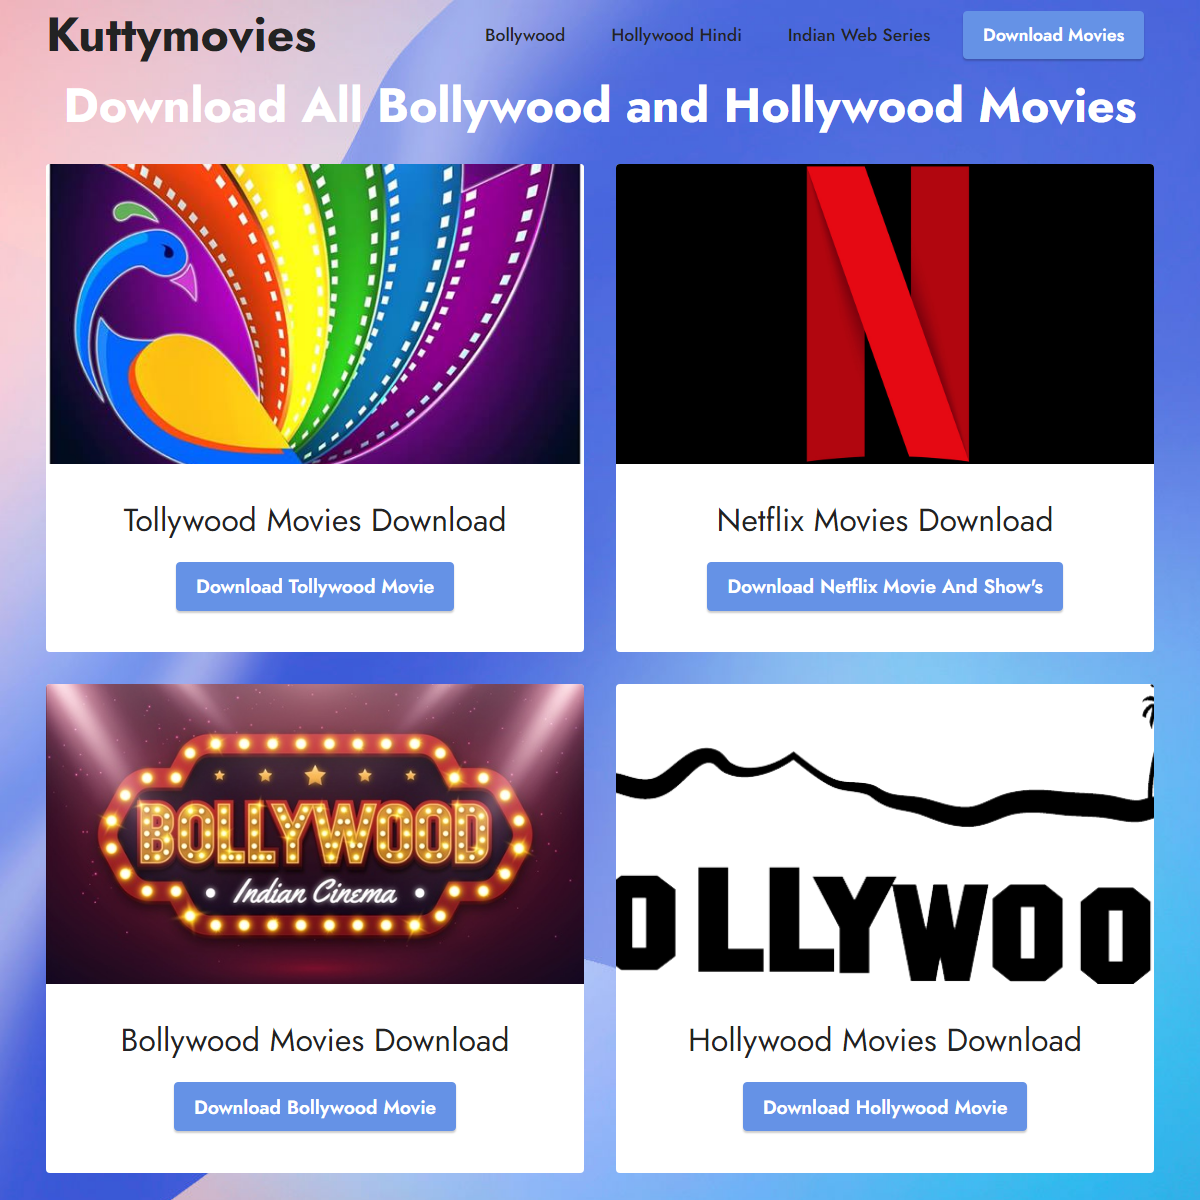 A complete backup of https://kuttymovies.netlify.app/